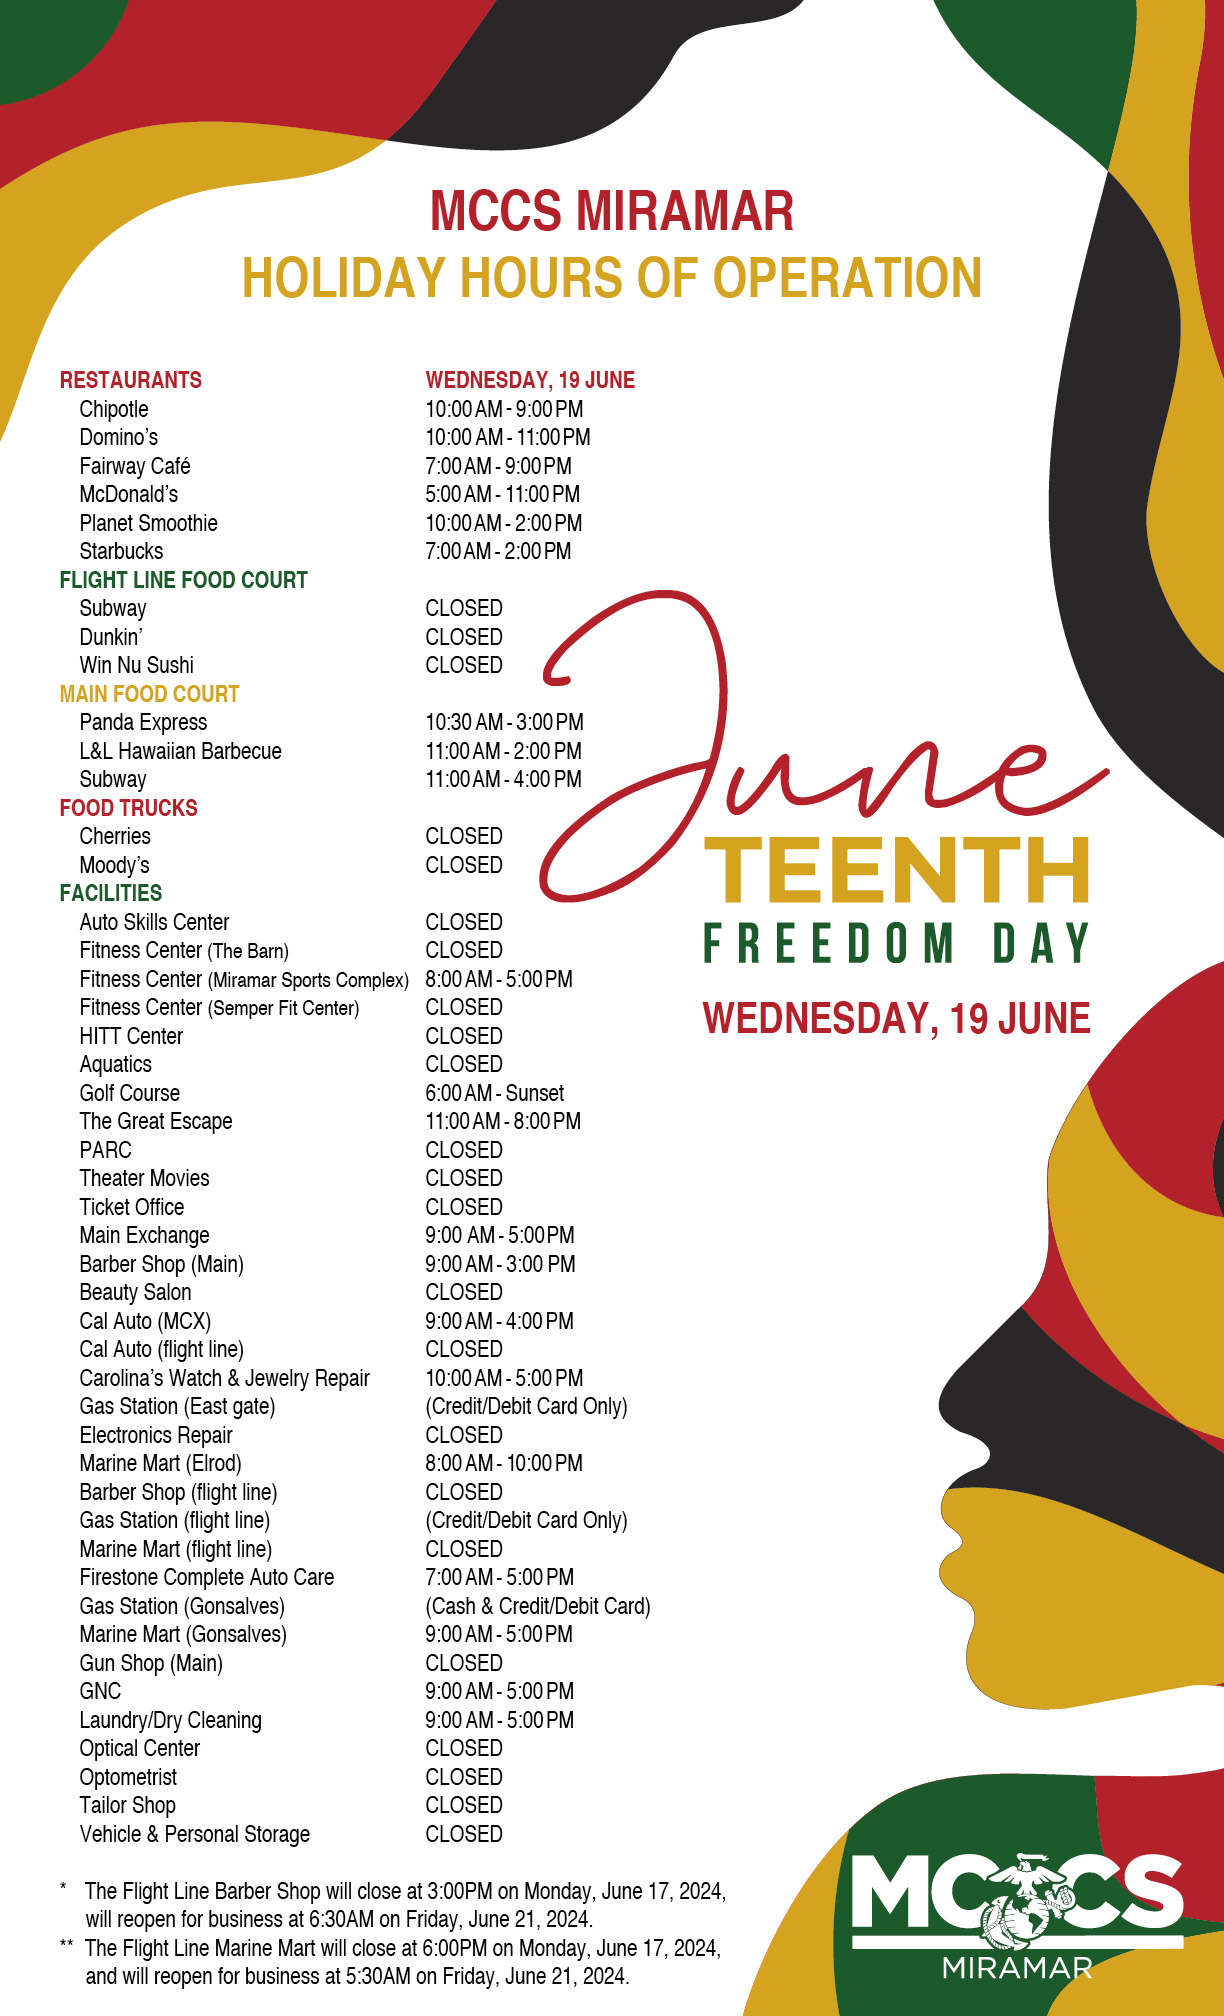 MCCS Miramar Holiday Hours of Operation for Juneteenth, Wednesday, June 19, 2024